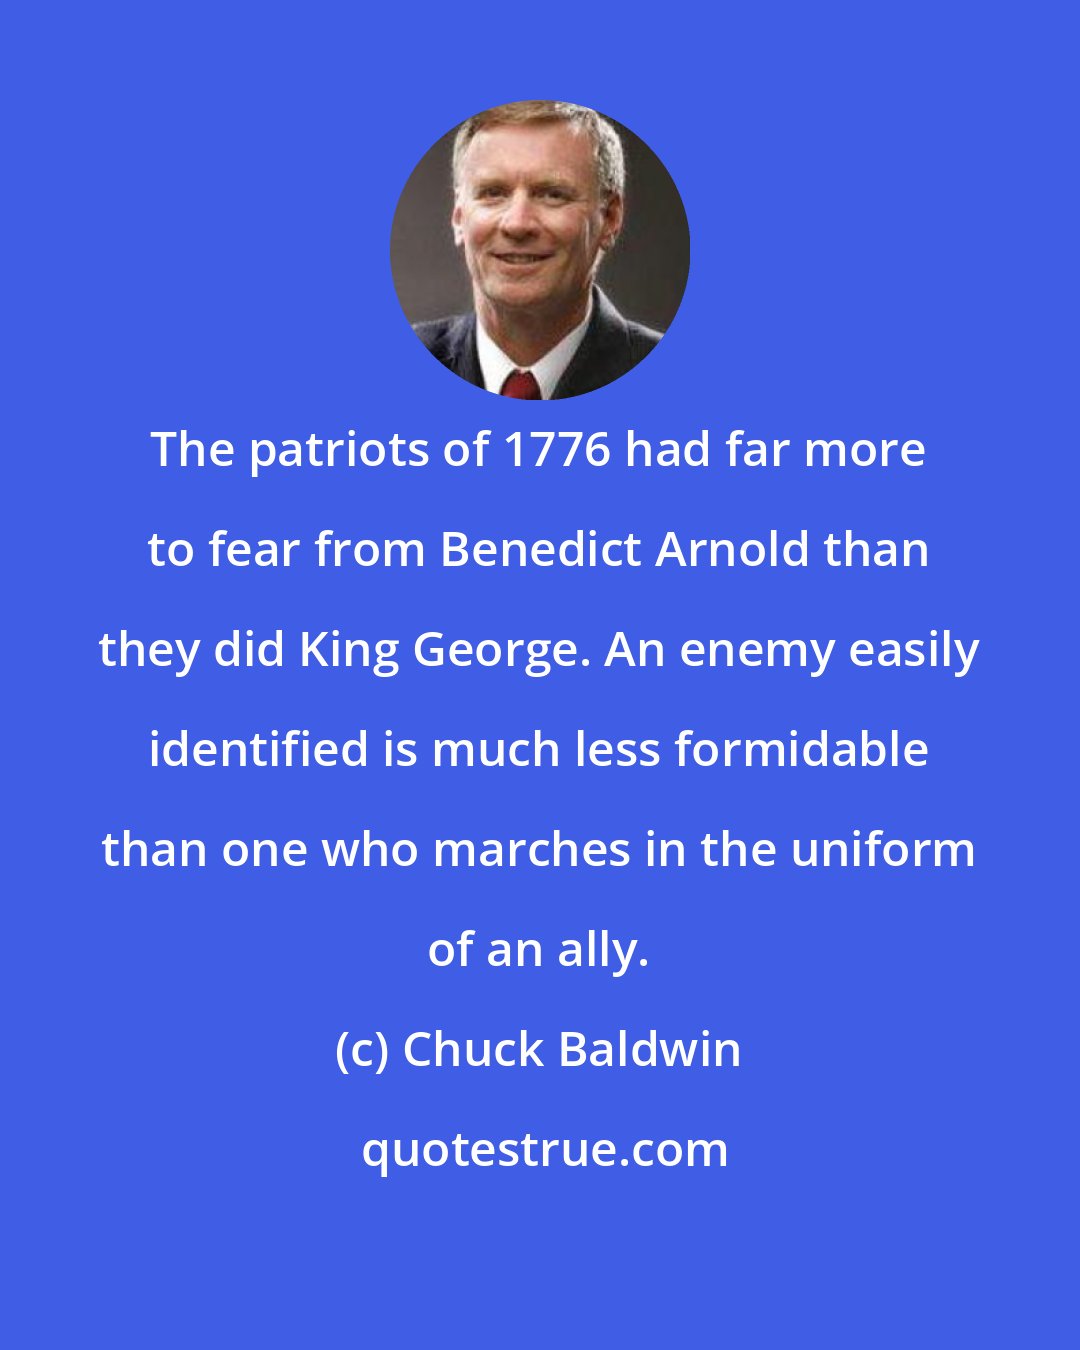 Chuck Baldwin: The patriots of 1776 had far more to fear from Benedict Arnold than they did King George. An enemy easily identified is much less formidable than one who marches in the uniform of an ally.